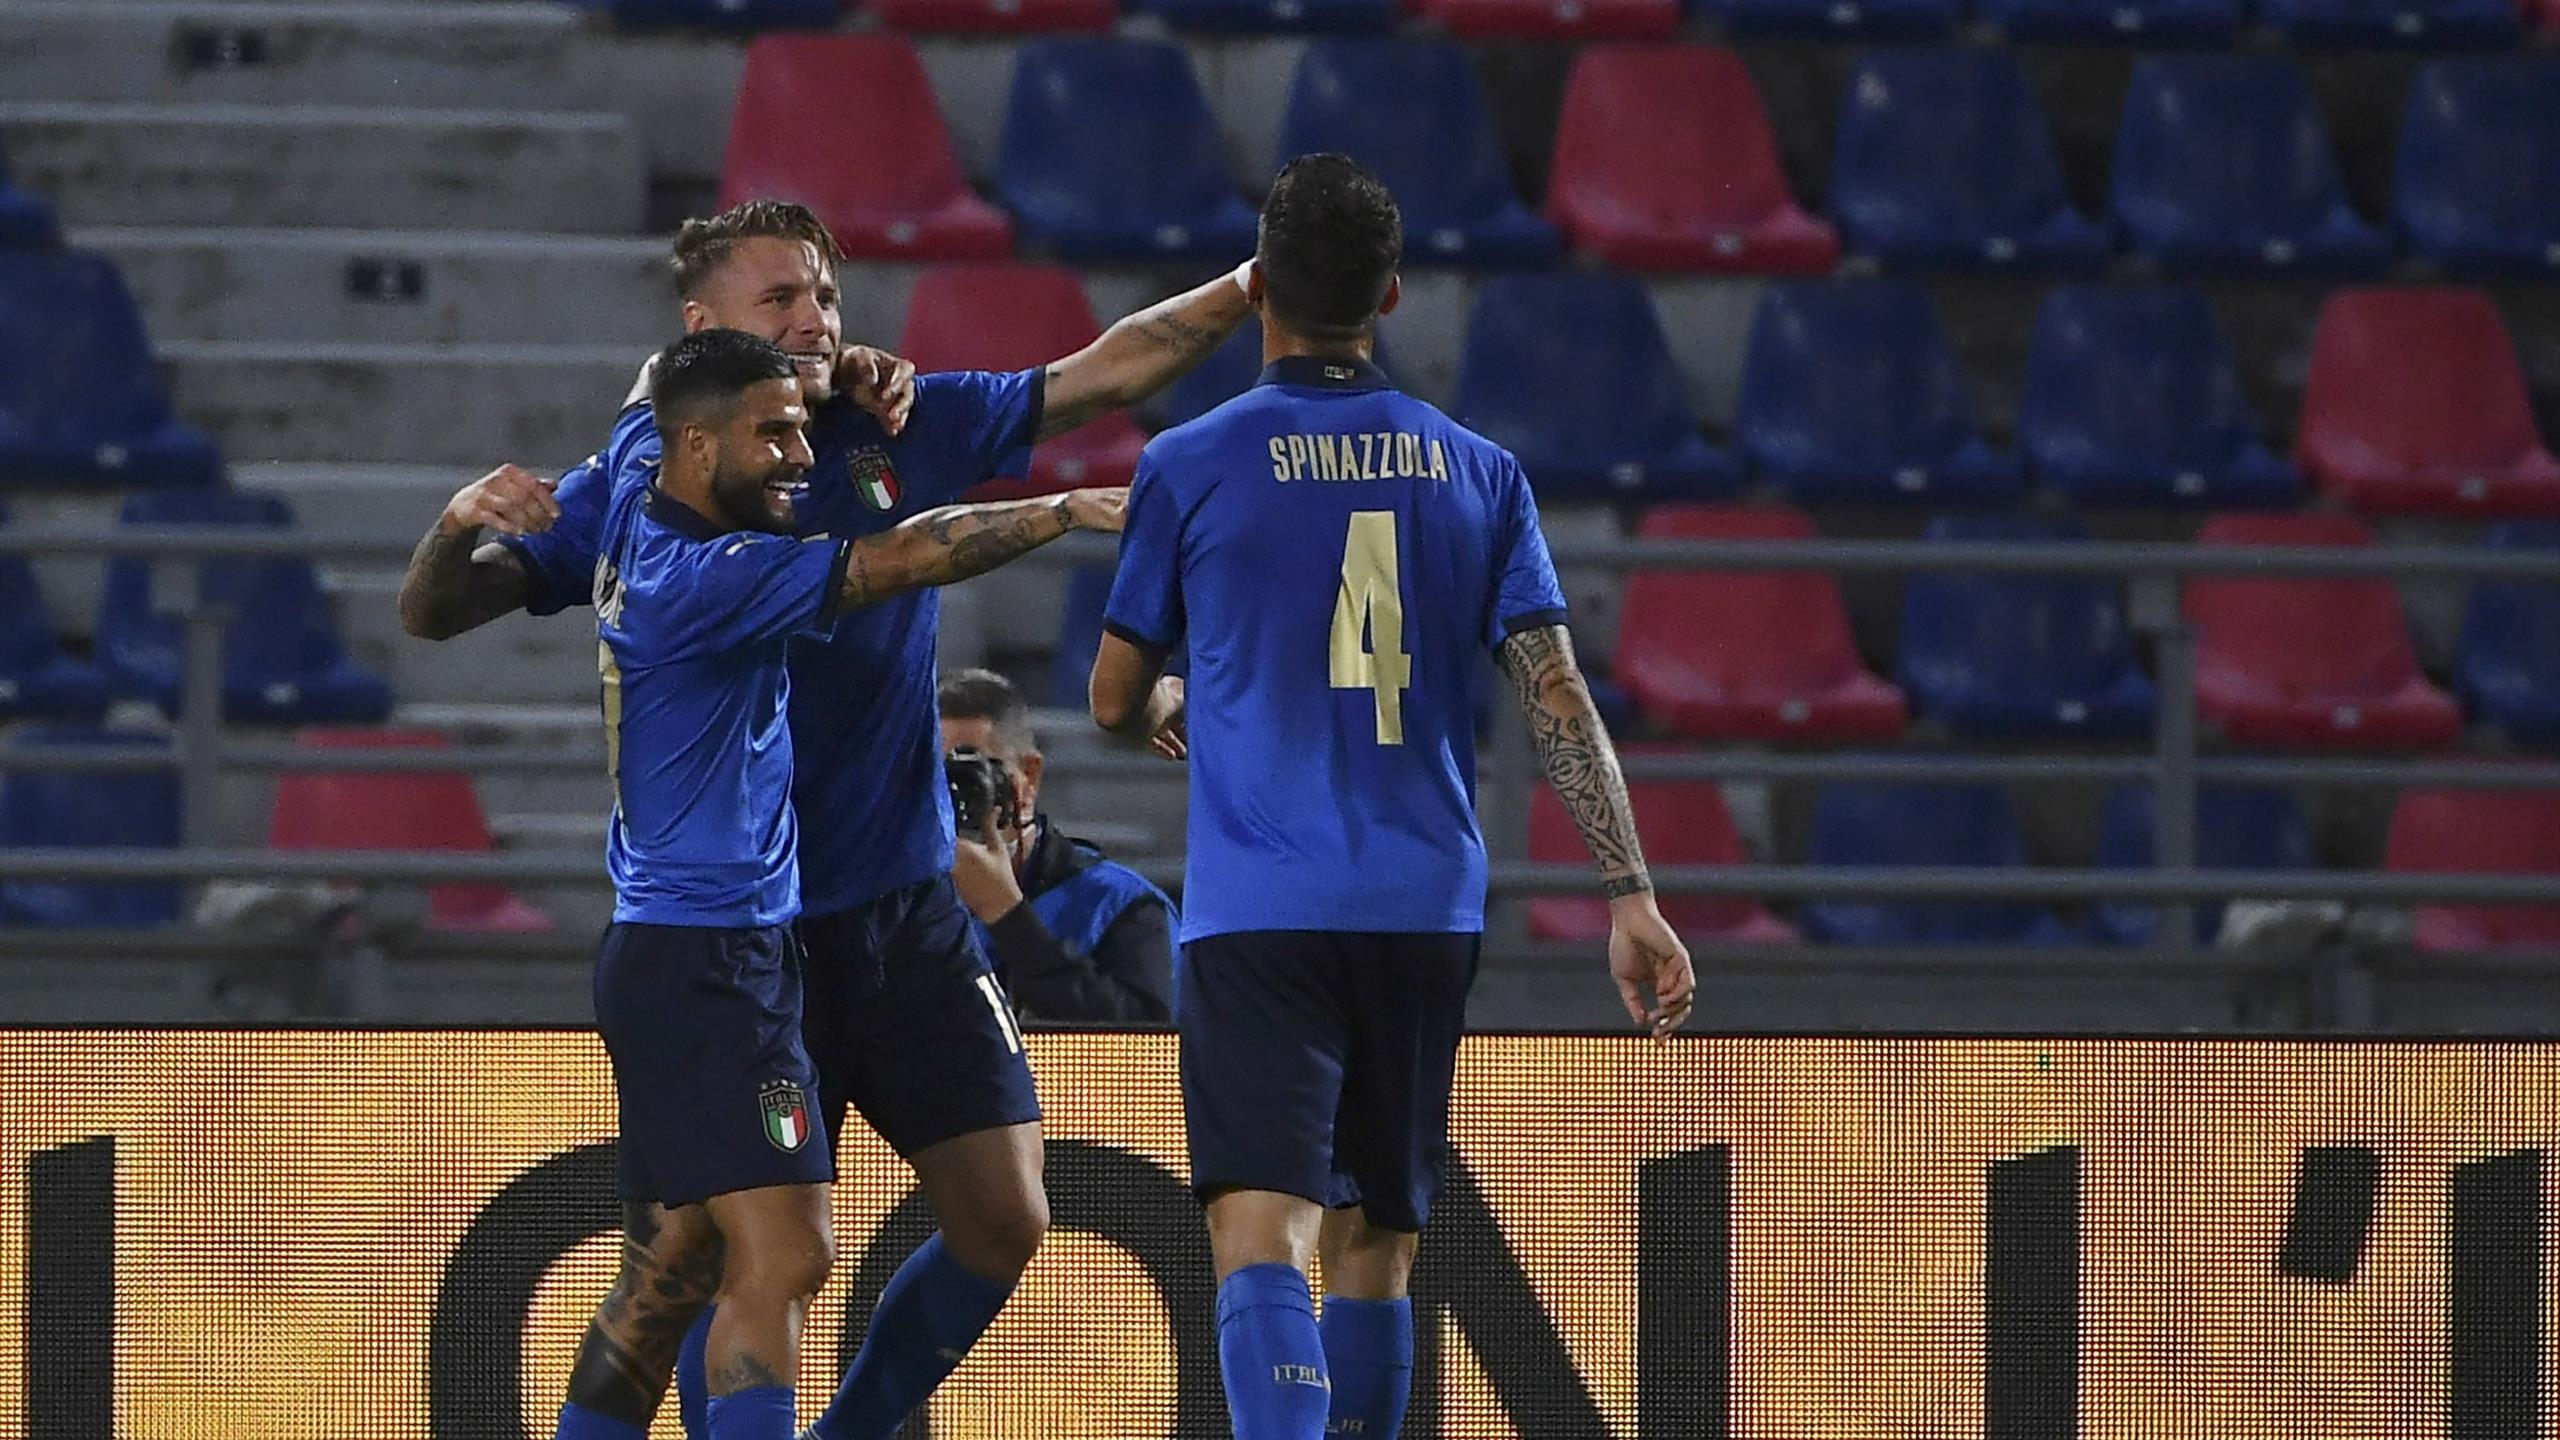 Euro 2020 friendlies Immobile and Lorenzo Insigne both score as Italy hammer Czech Republic